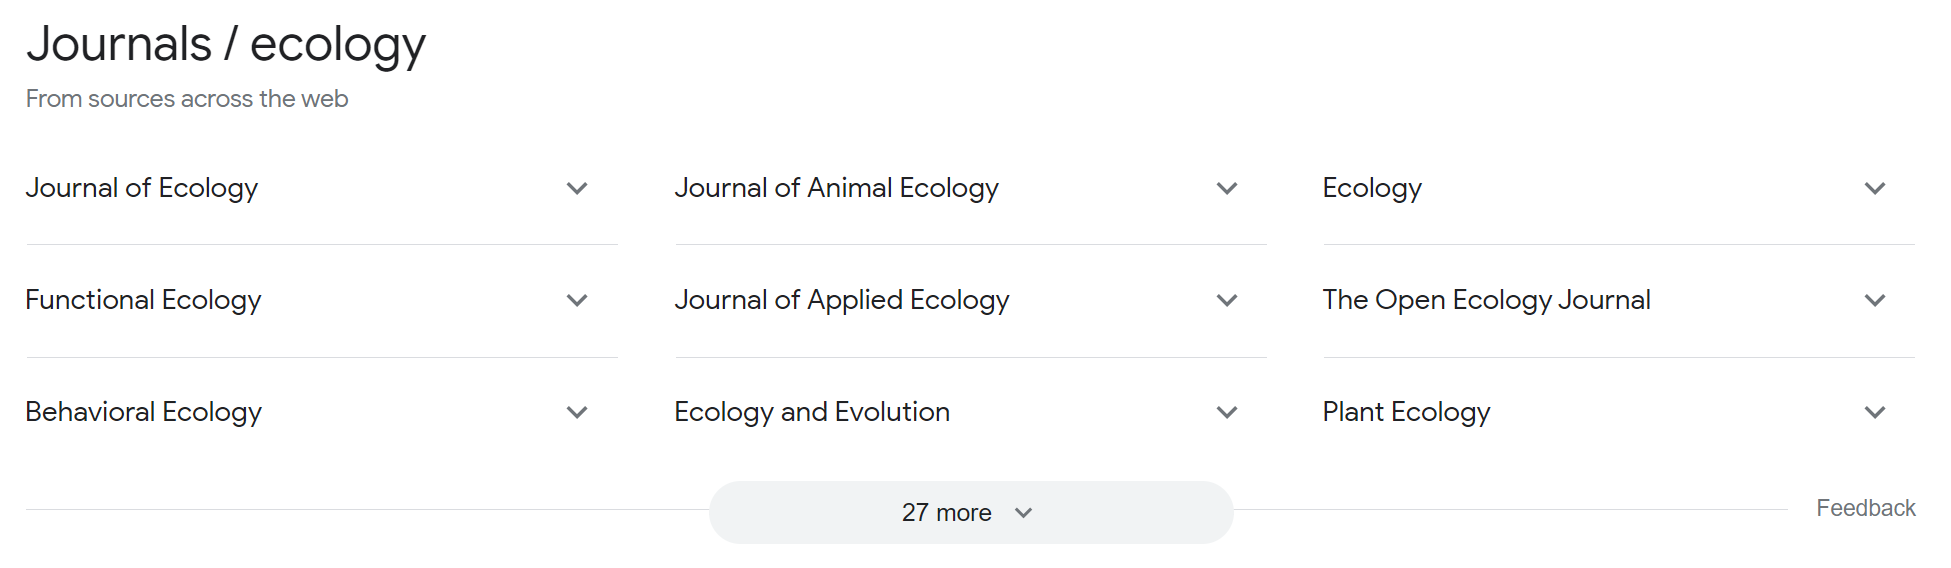 A screenshot of the results of searching for the term "ecology journal" on Google. 